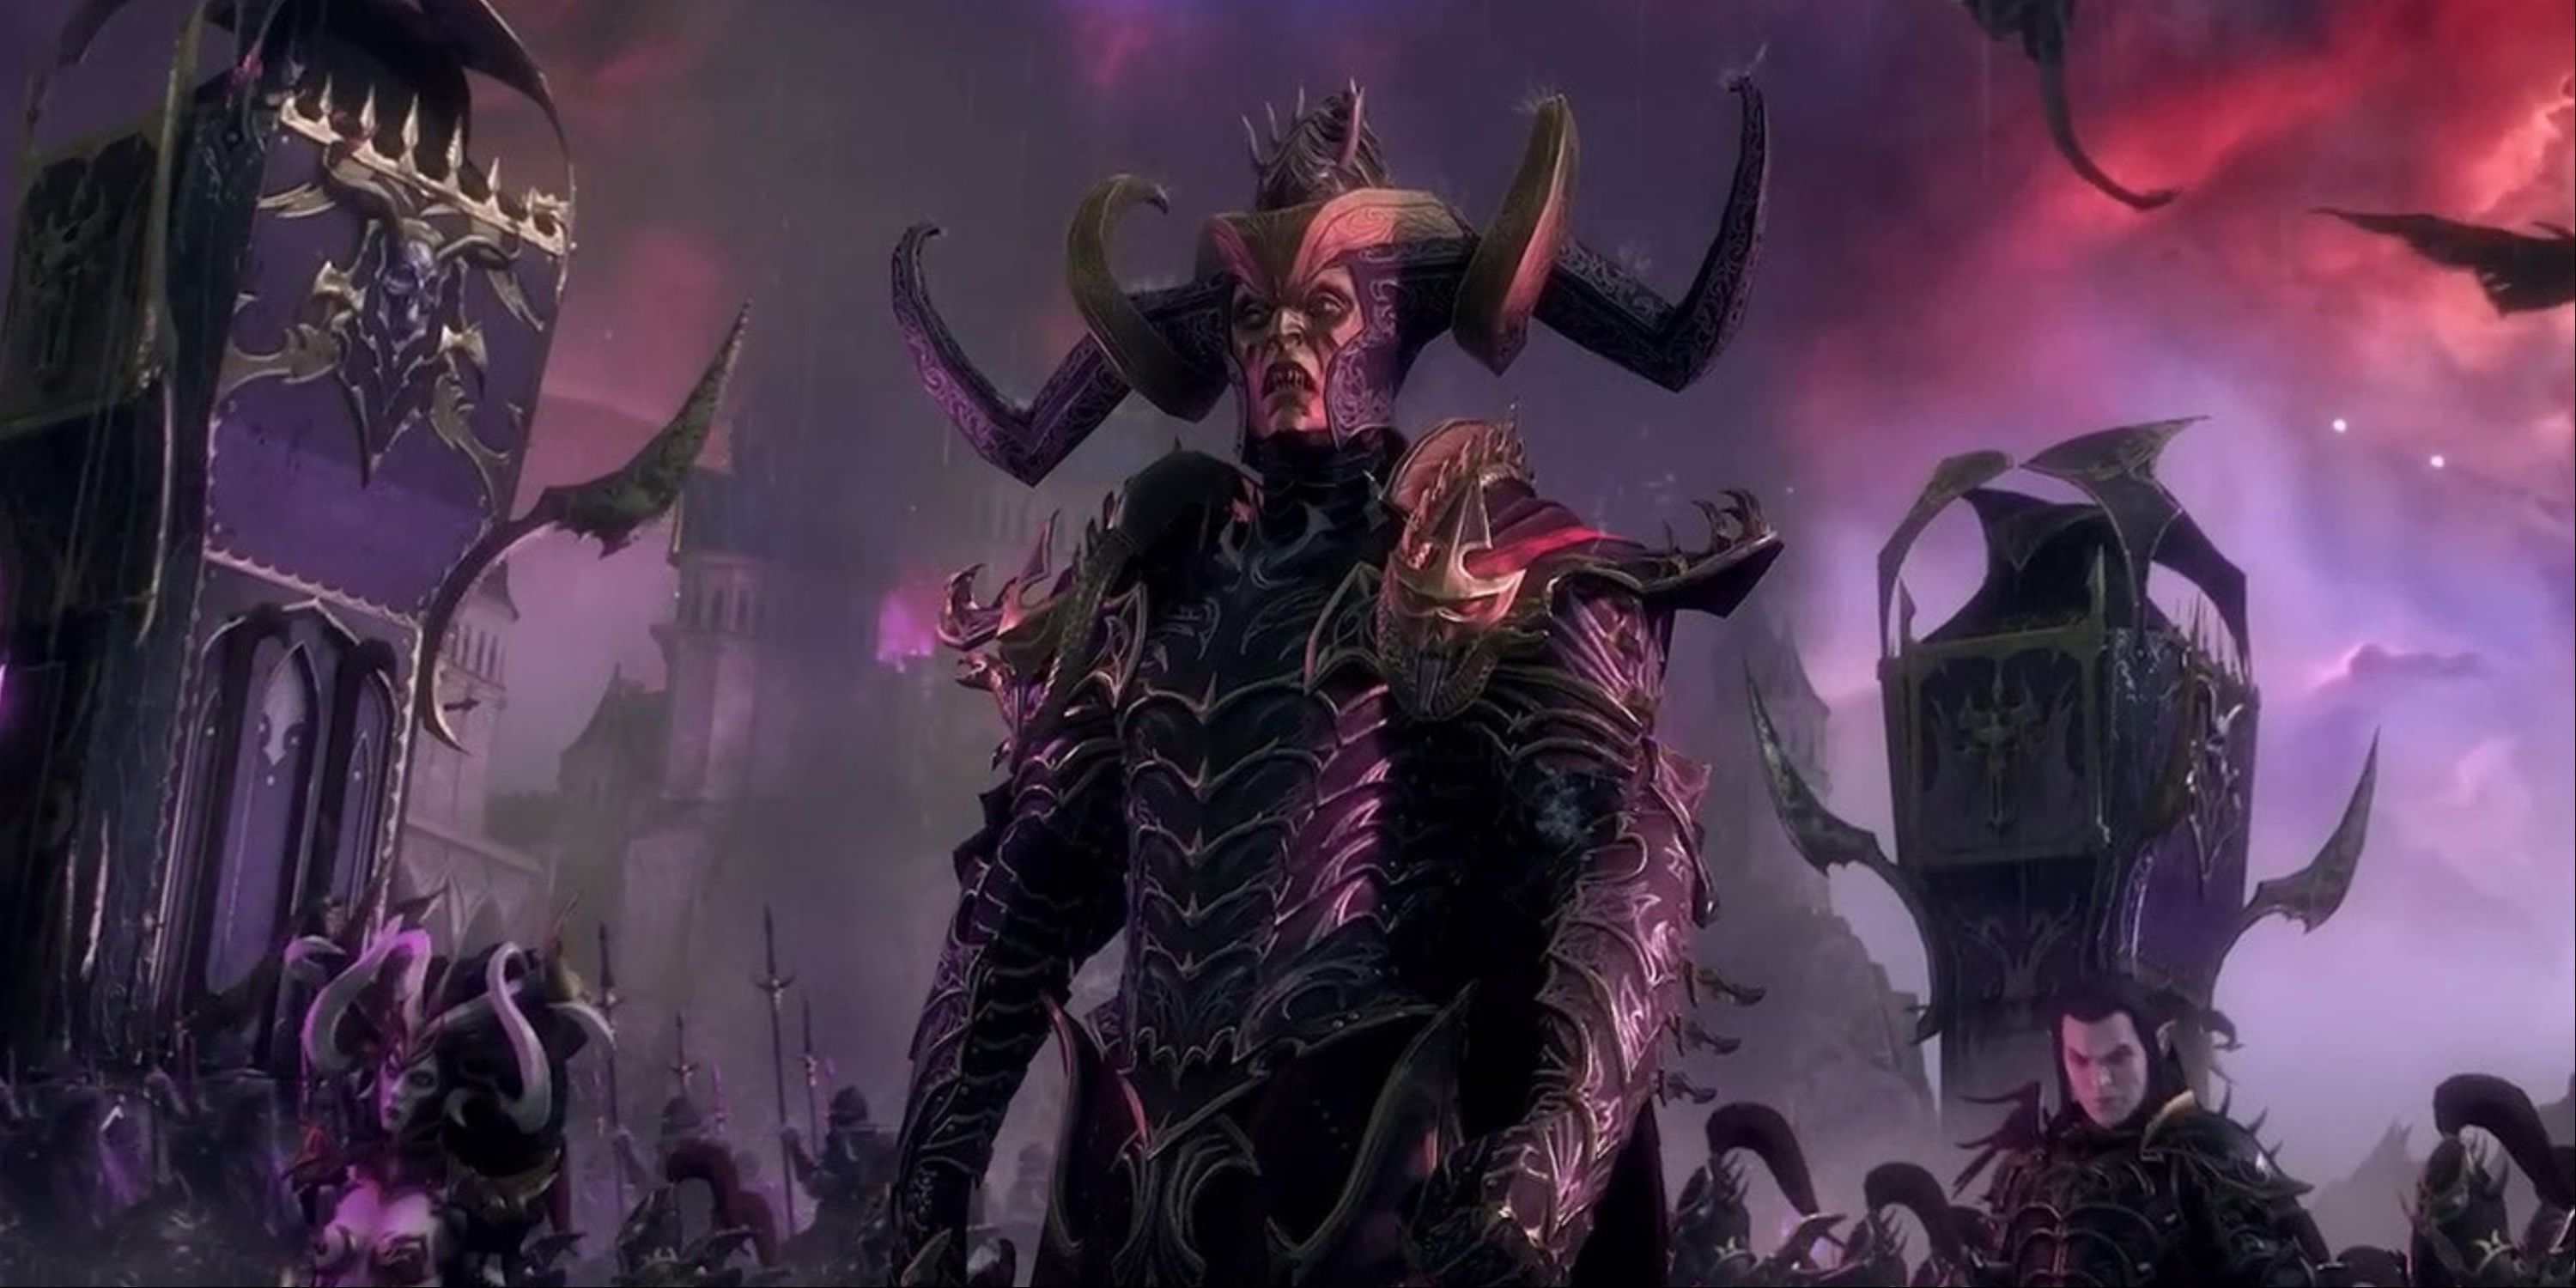 Total War Warhammer III, Malekith the Witch King in front of his armies - launch trailer image